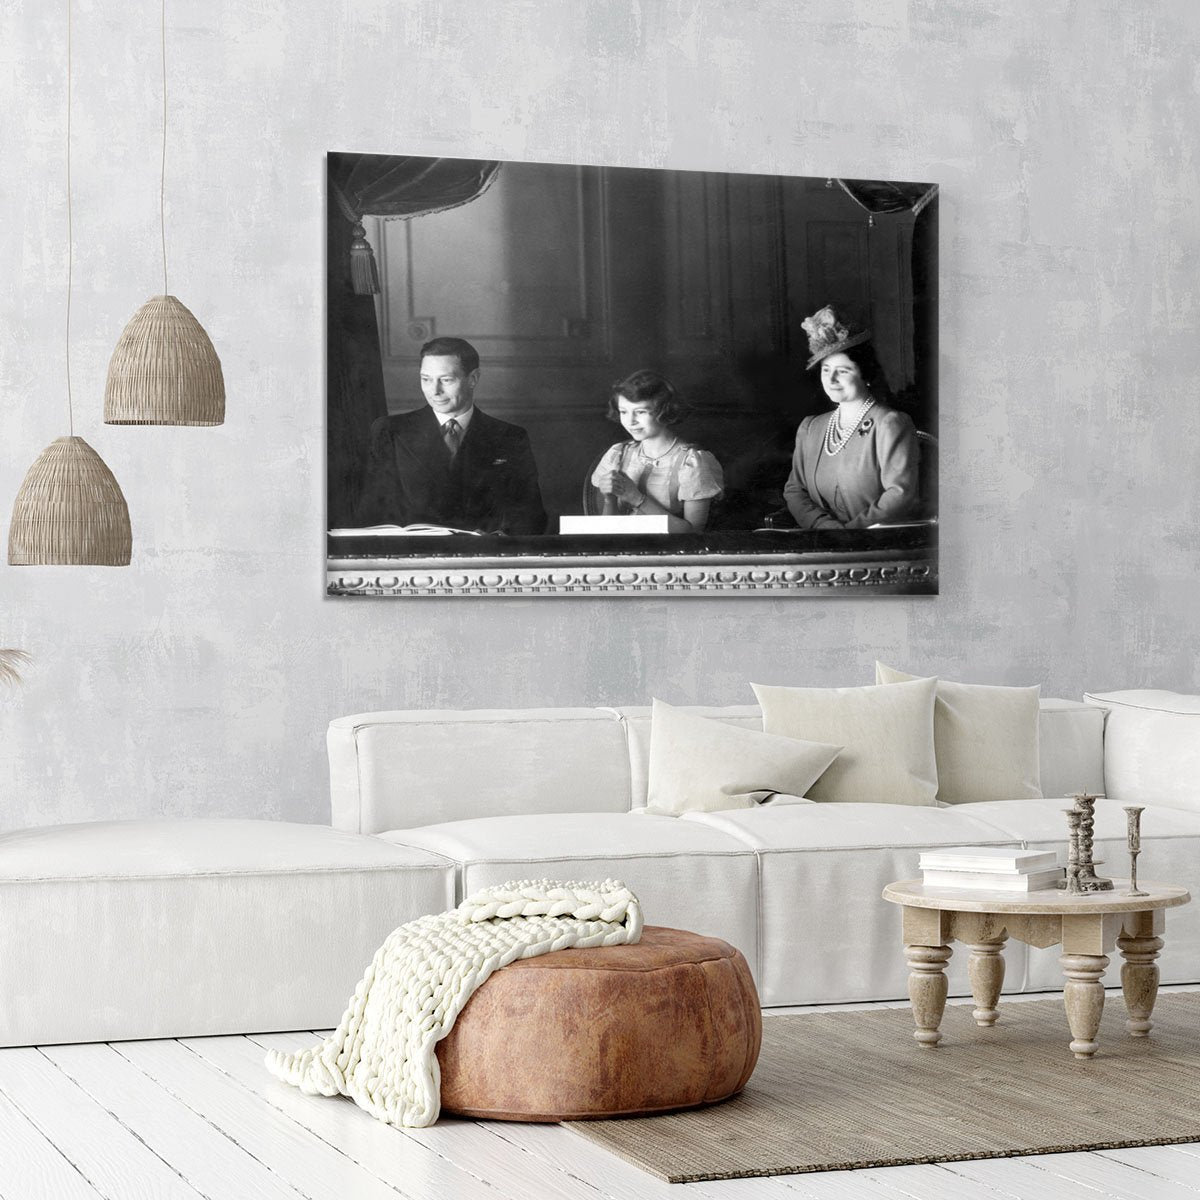 Queen Elizabeth II with her parents entranced viewing the stage Canvas Print or Poster